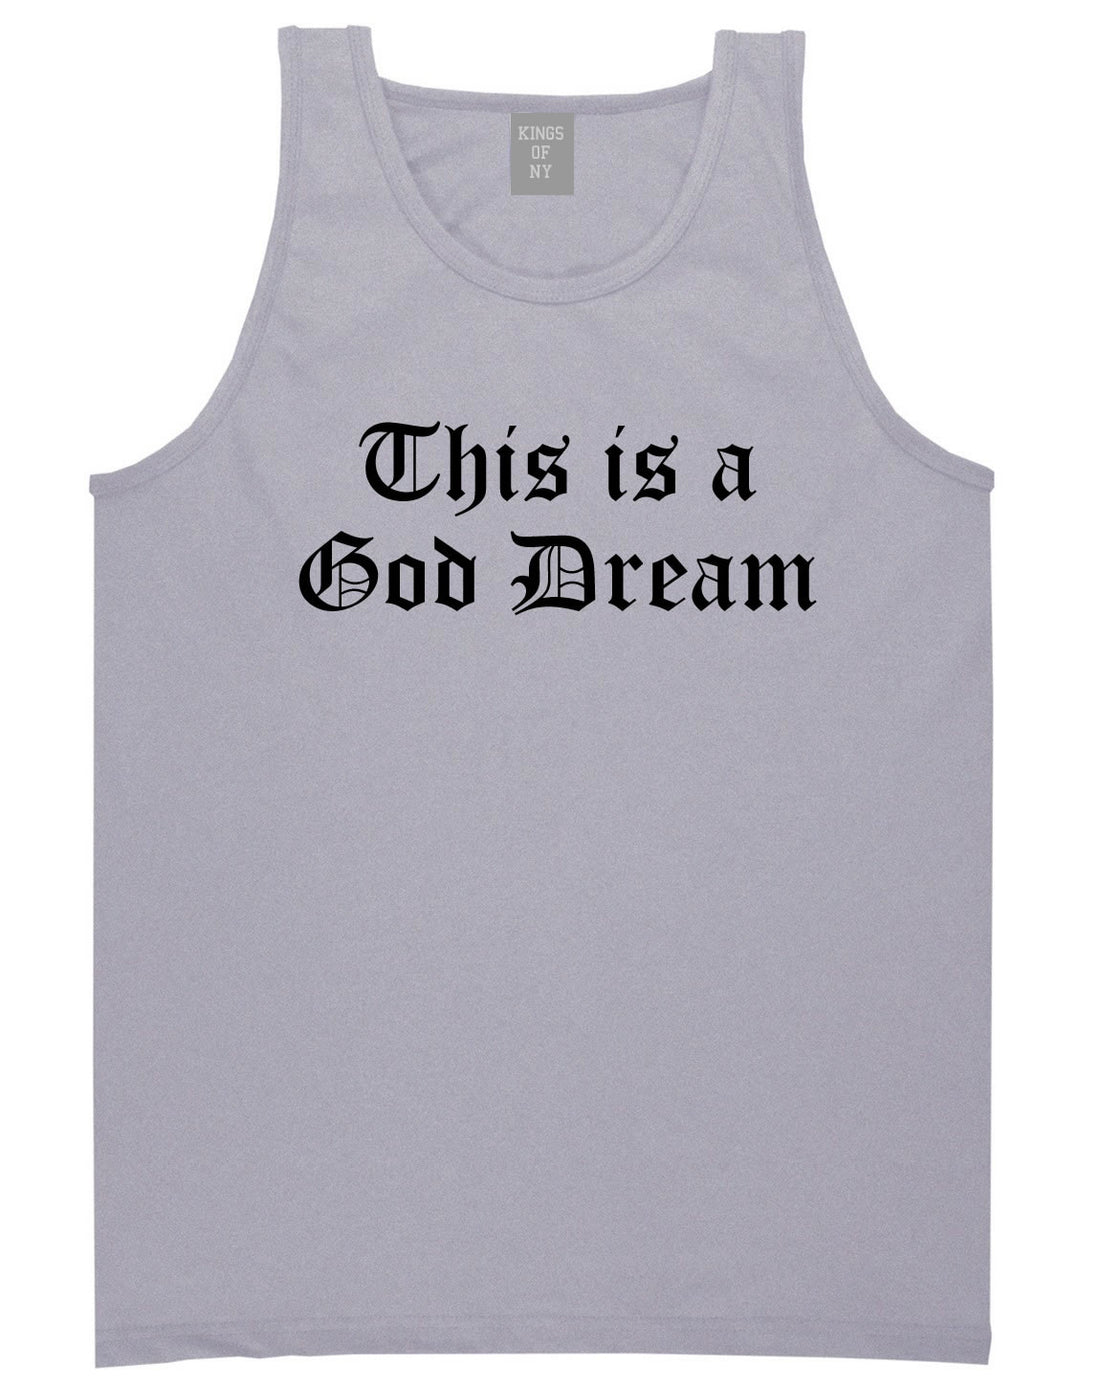 This Is A God Dream Gothic Old English Tank Top in Grey By Kings Of NY